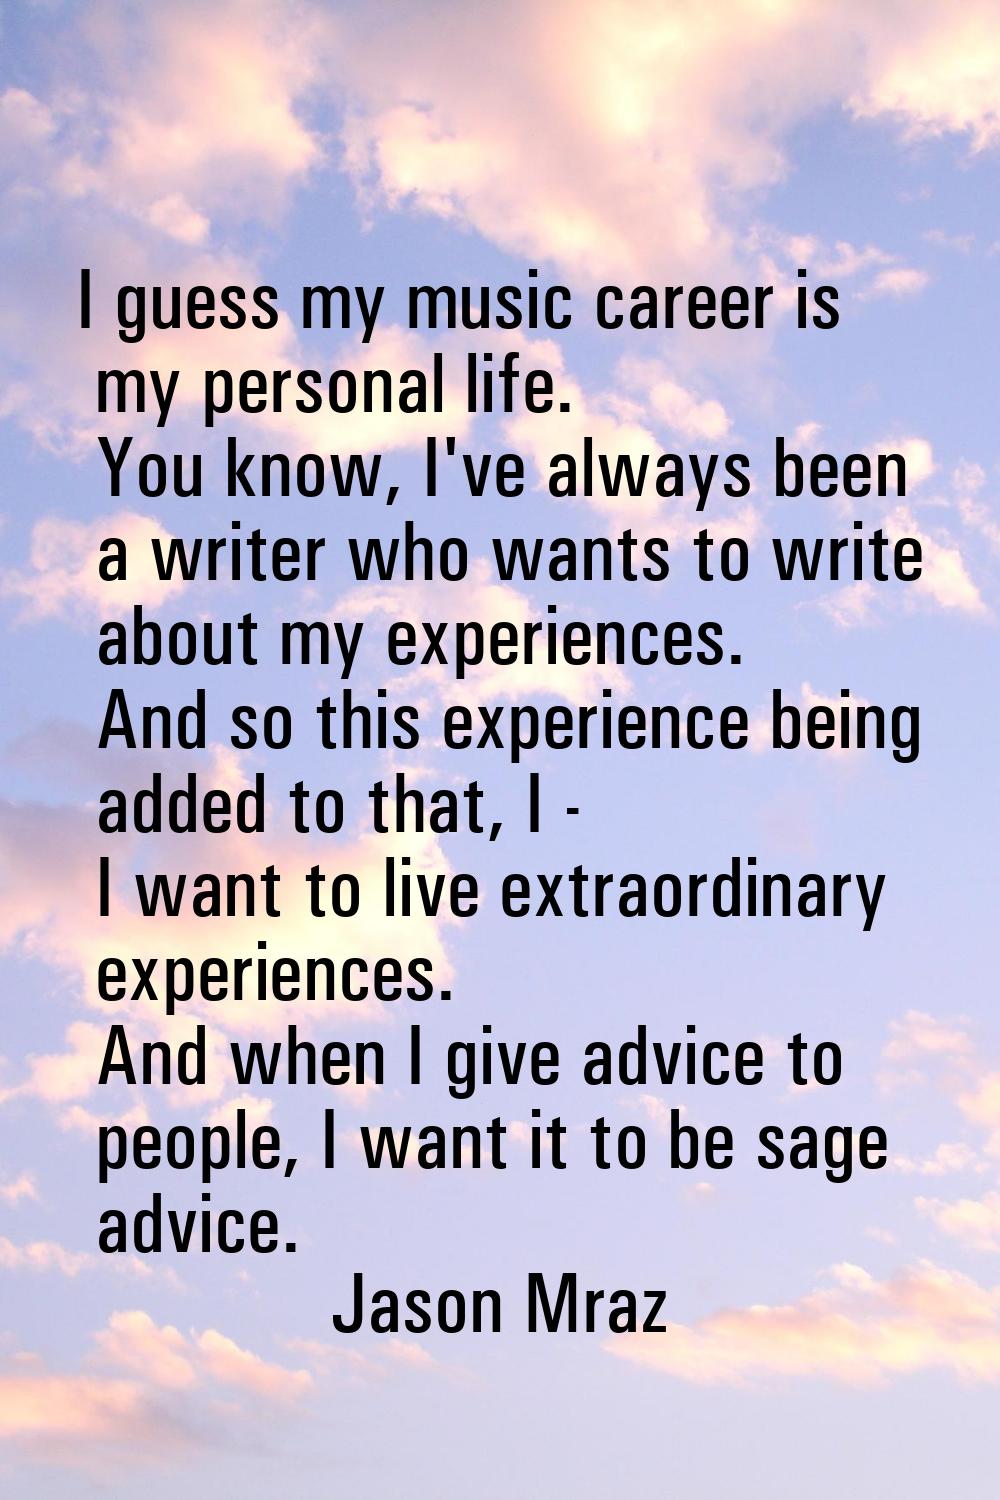 I guess my music career is my personal life. You know, I've always been a writer who wants to write